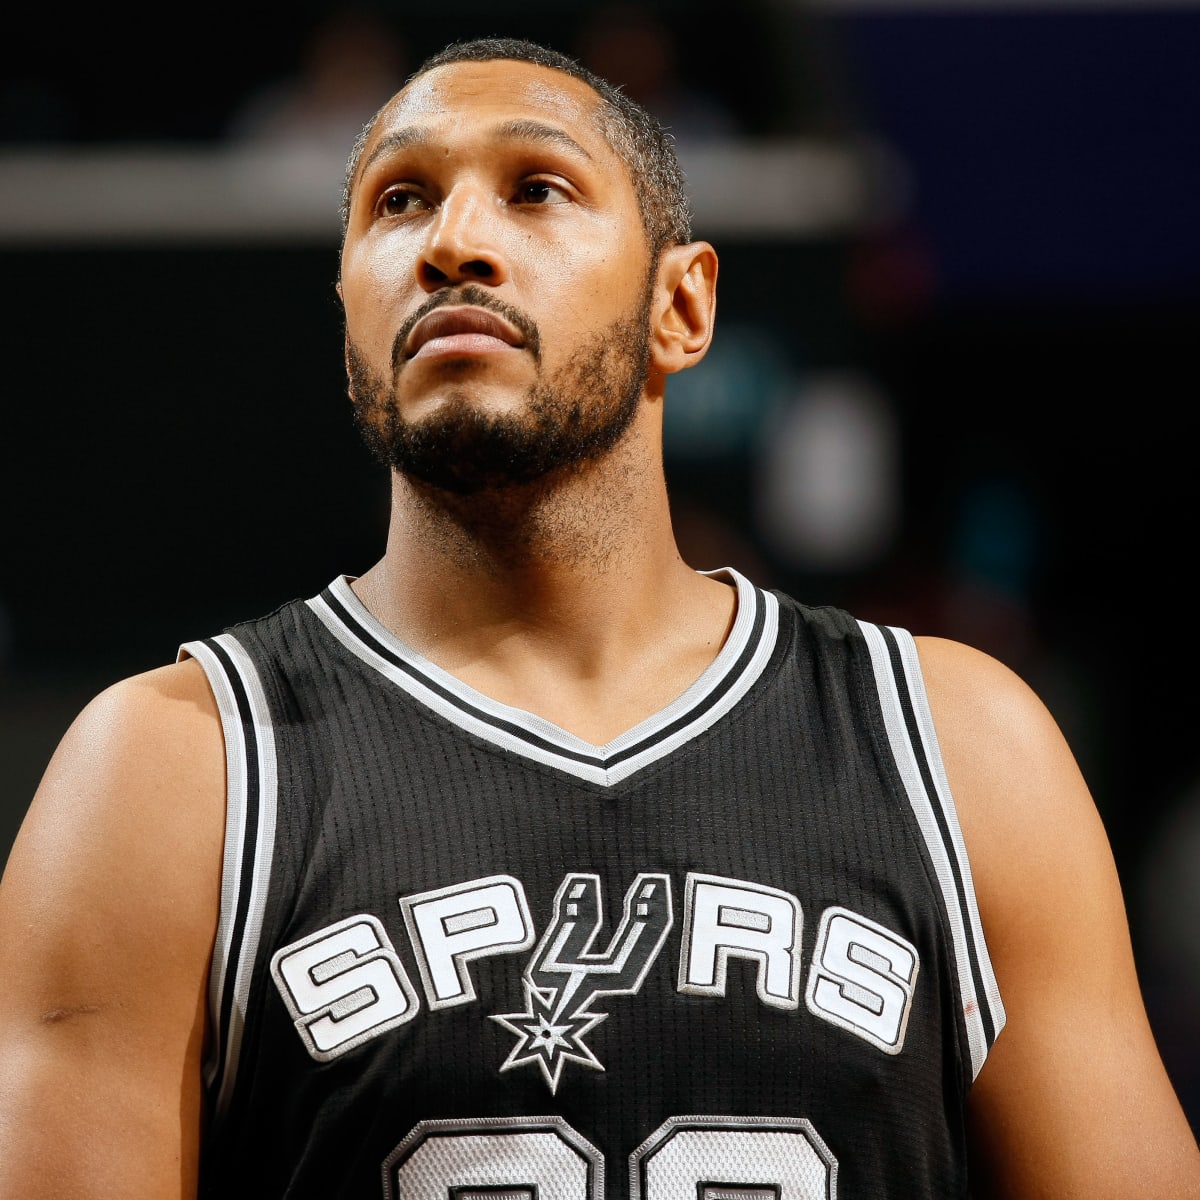 Boris Diaw Has Weight Clause in Contract